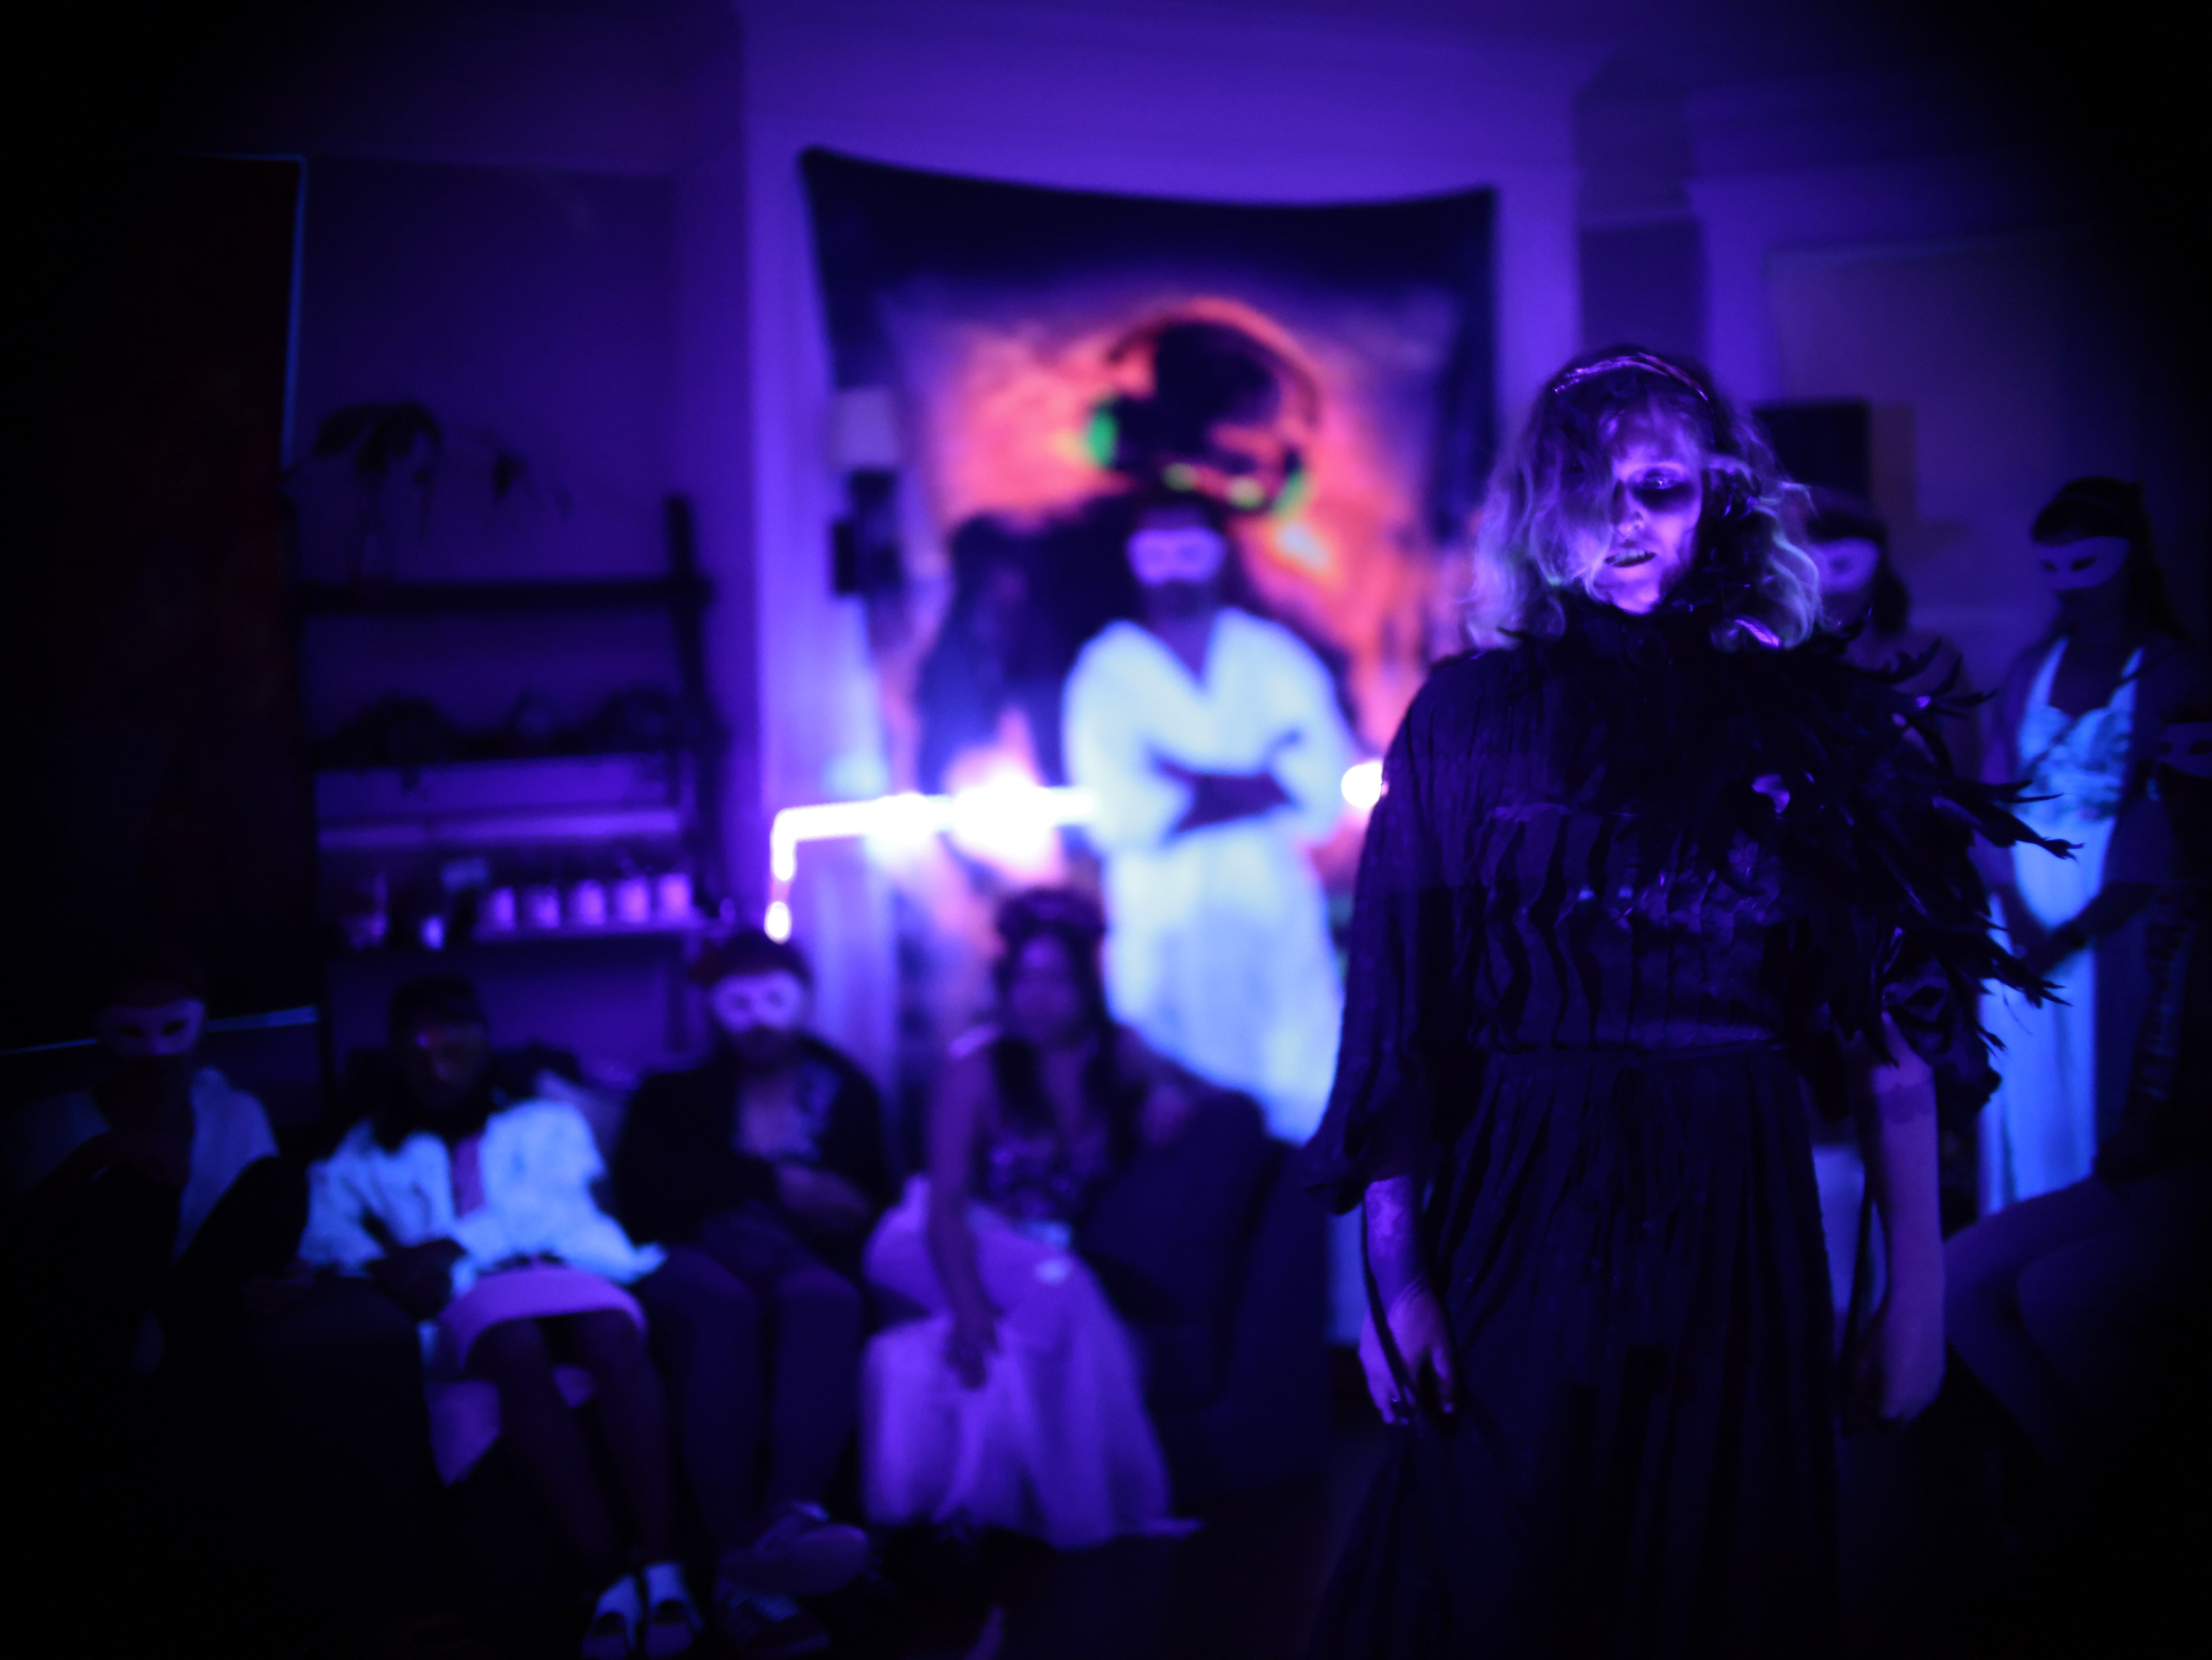 One person in spooky attire stands in a dimly lit room with people in costume. Purple lighting sets a haunting mood.